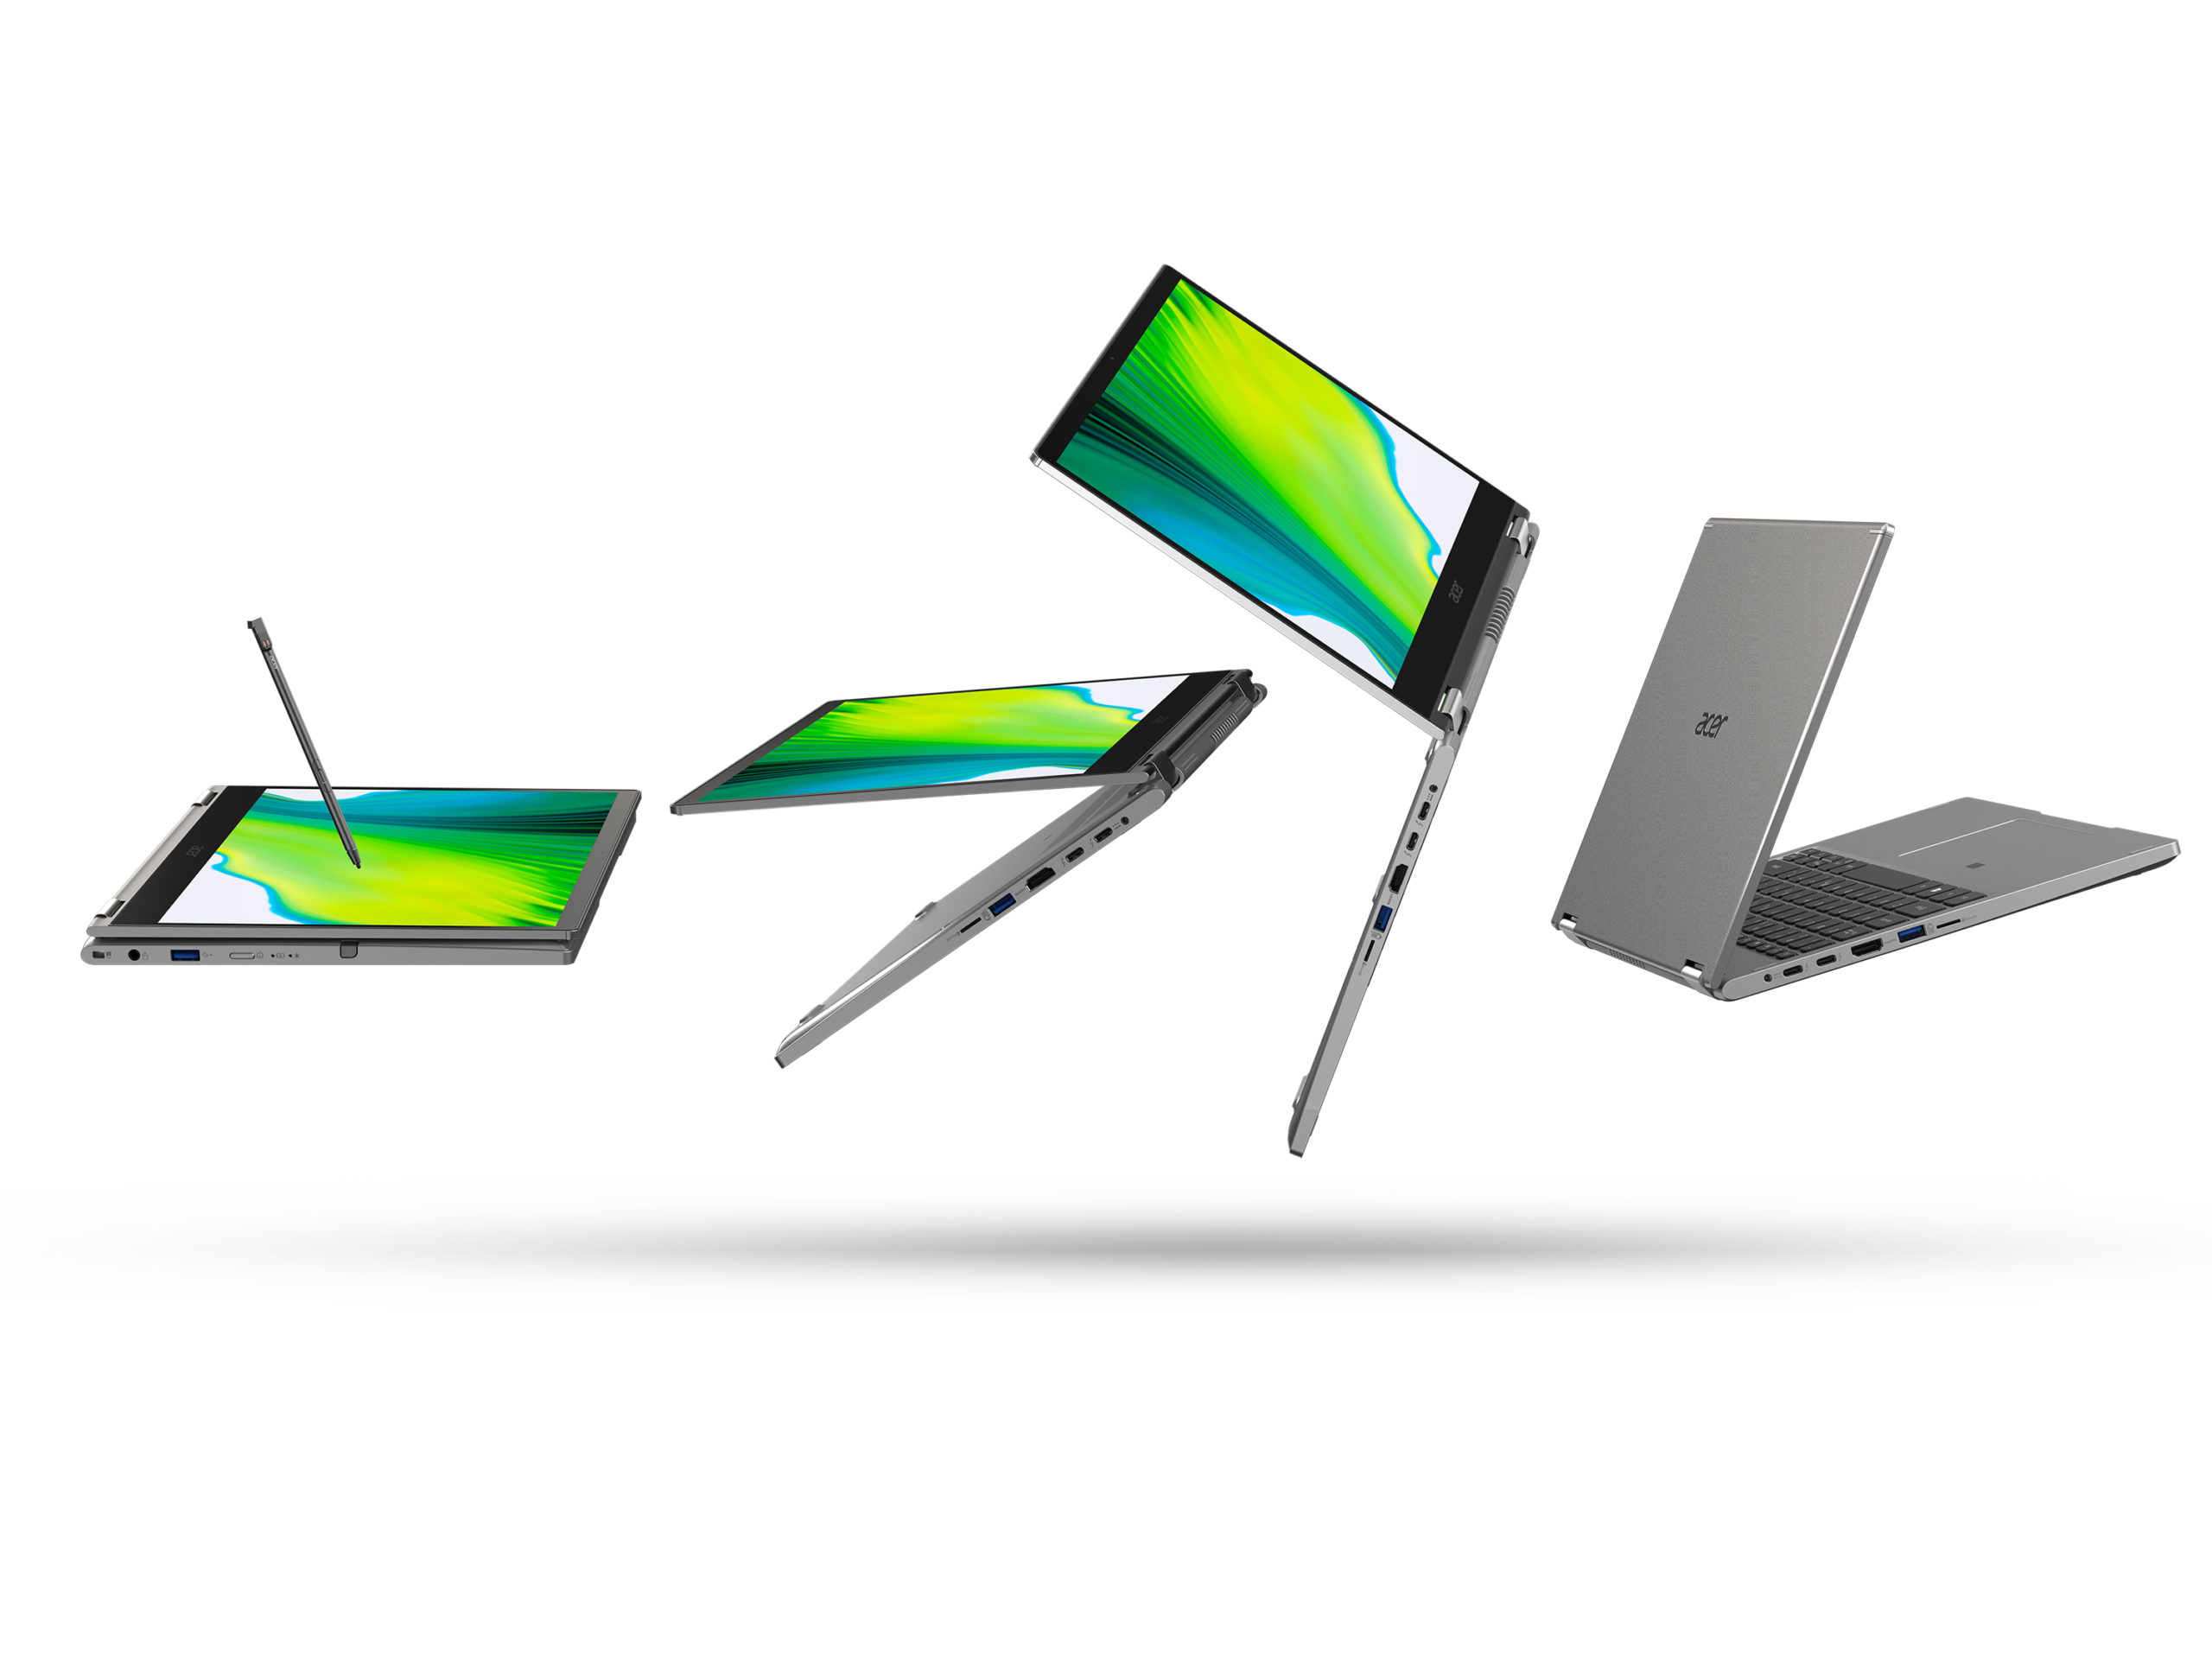 Acer Spin 3 shown in tablet, tent, laptop and stand modes floating